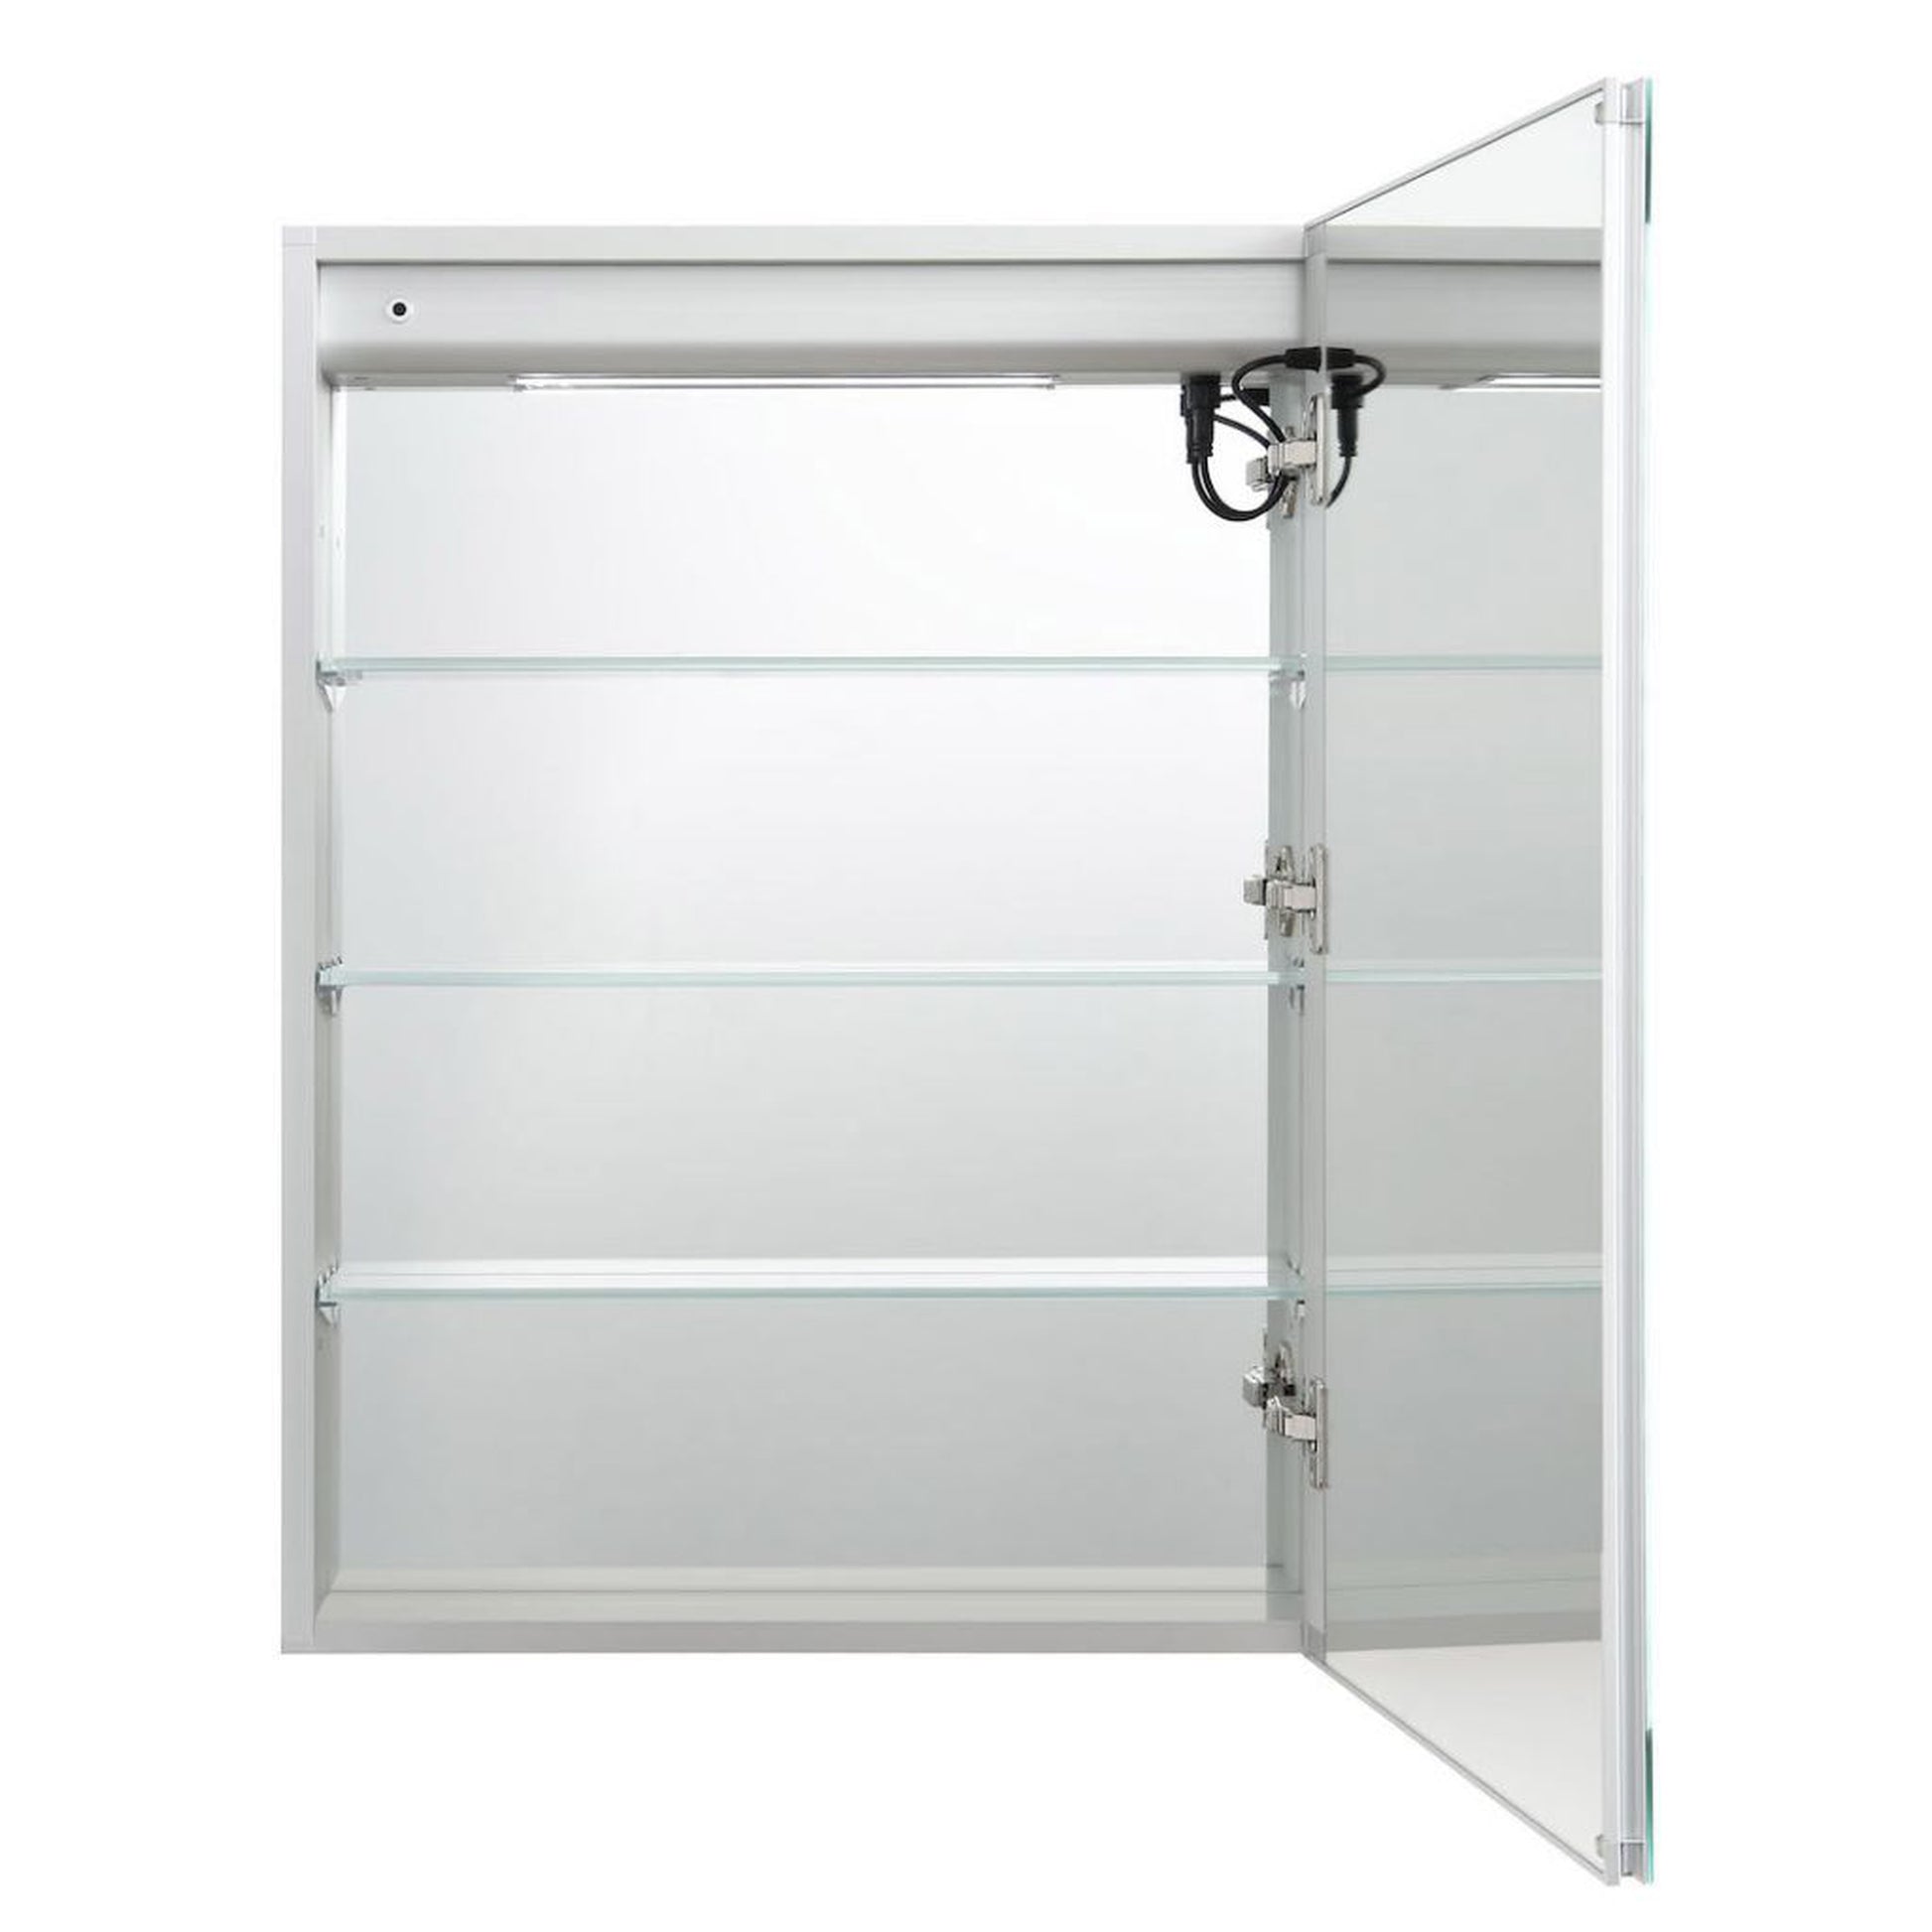 Blossom Vega 20" x 32" Recessed or Surface Mount Right-Hinged Door LED Mirror Medicine Cabinet With 3 Adjustable Glass Shelves and Built-In Defogger